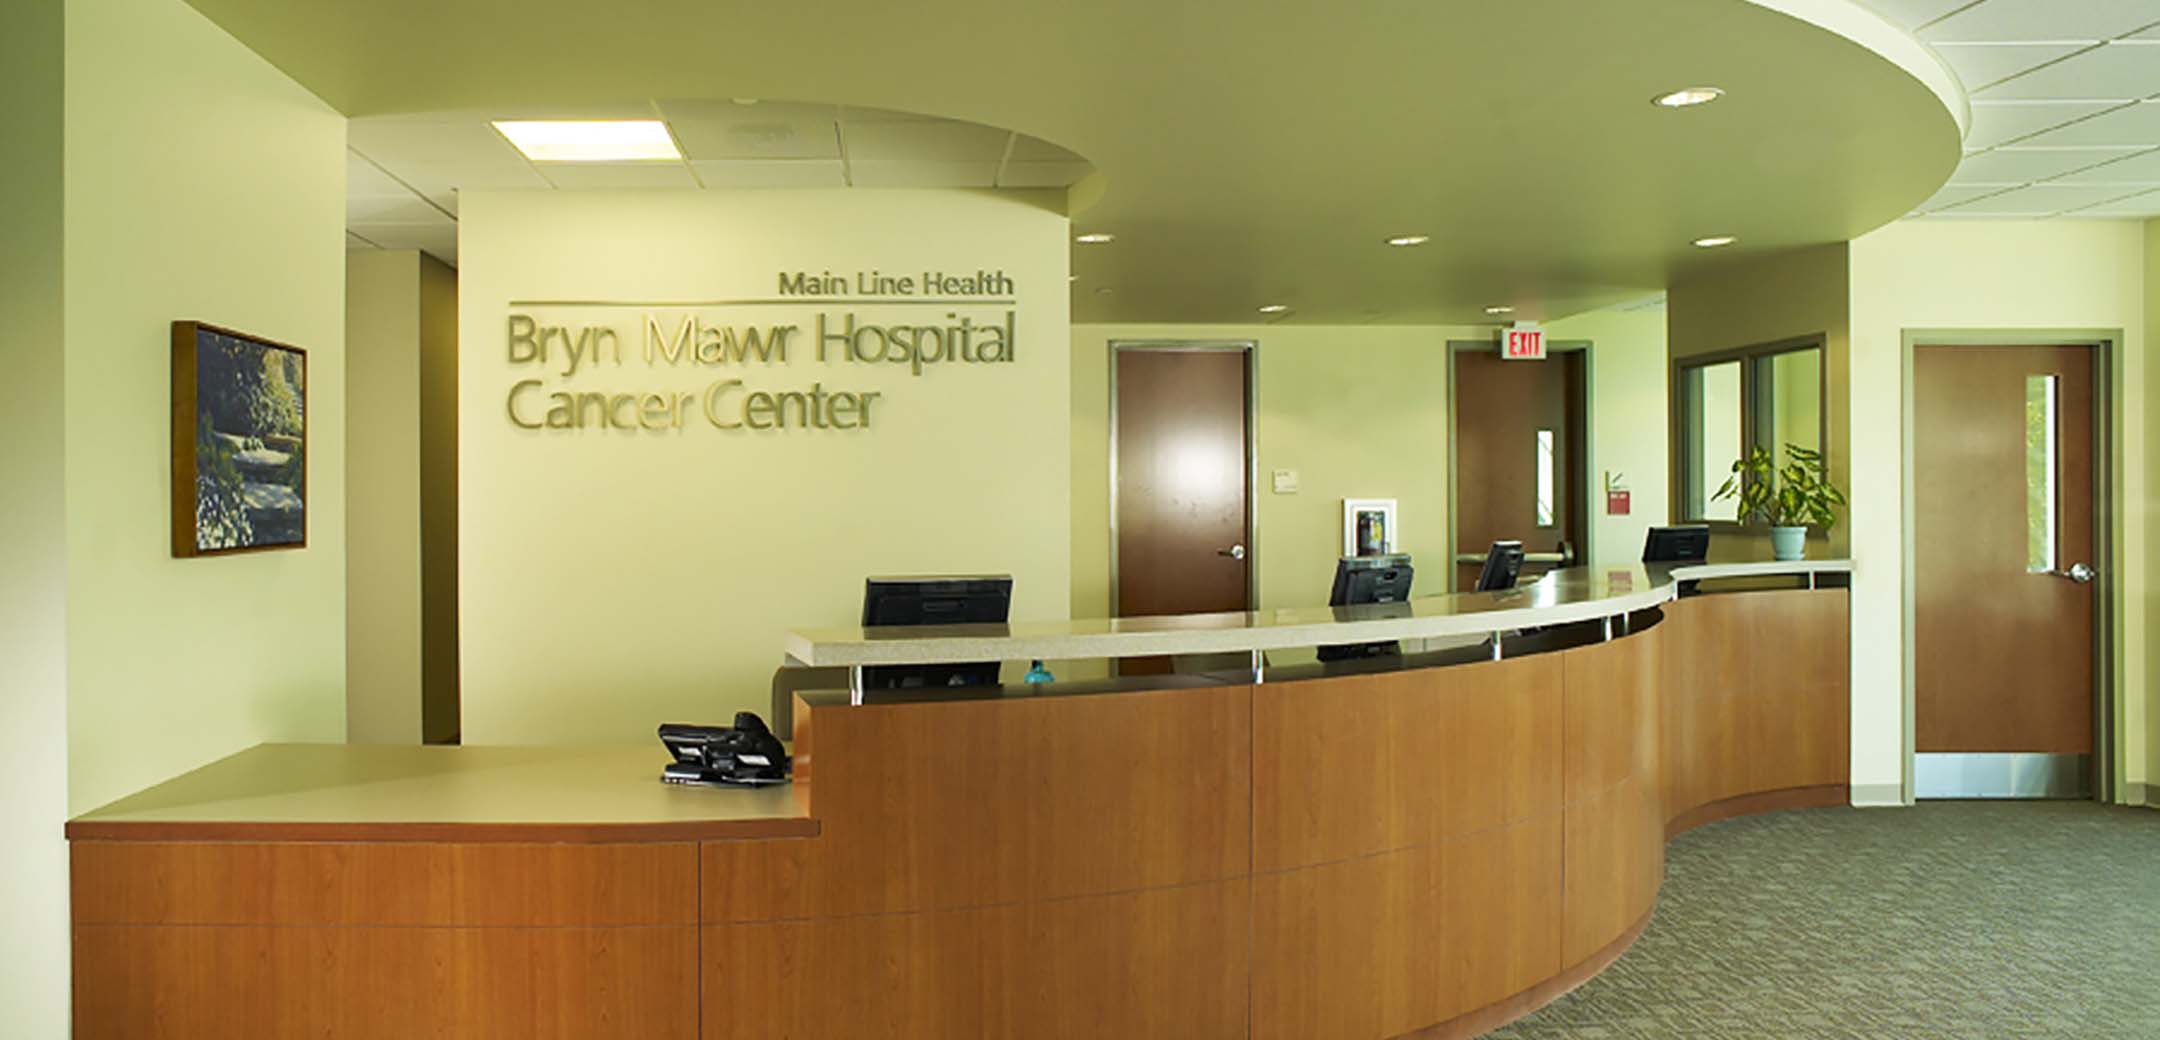 A close up image of the interior lobby of Main Line Health hospital, showcasing the reception desk and logo behind it.